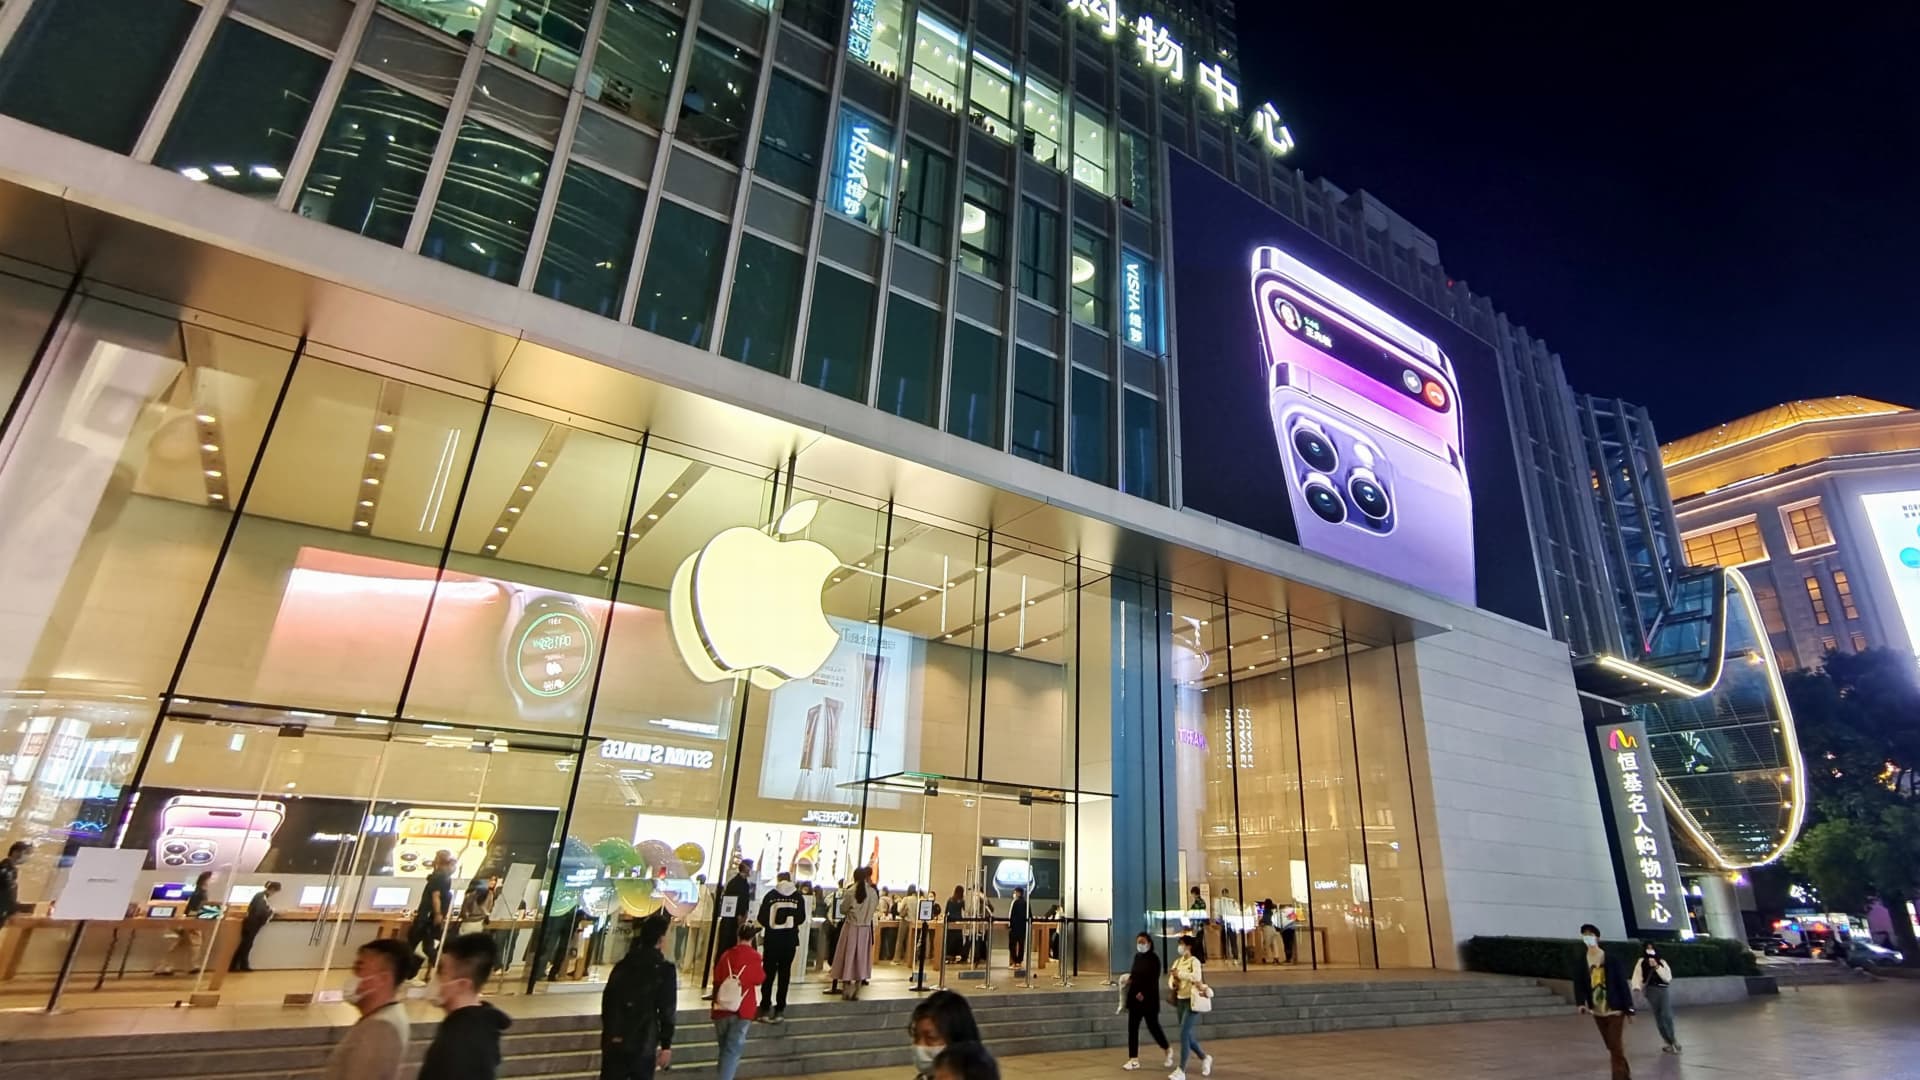 Apple could benefit in China from users spending more on smartphones